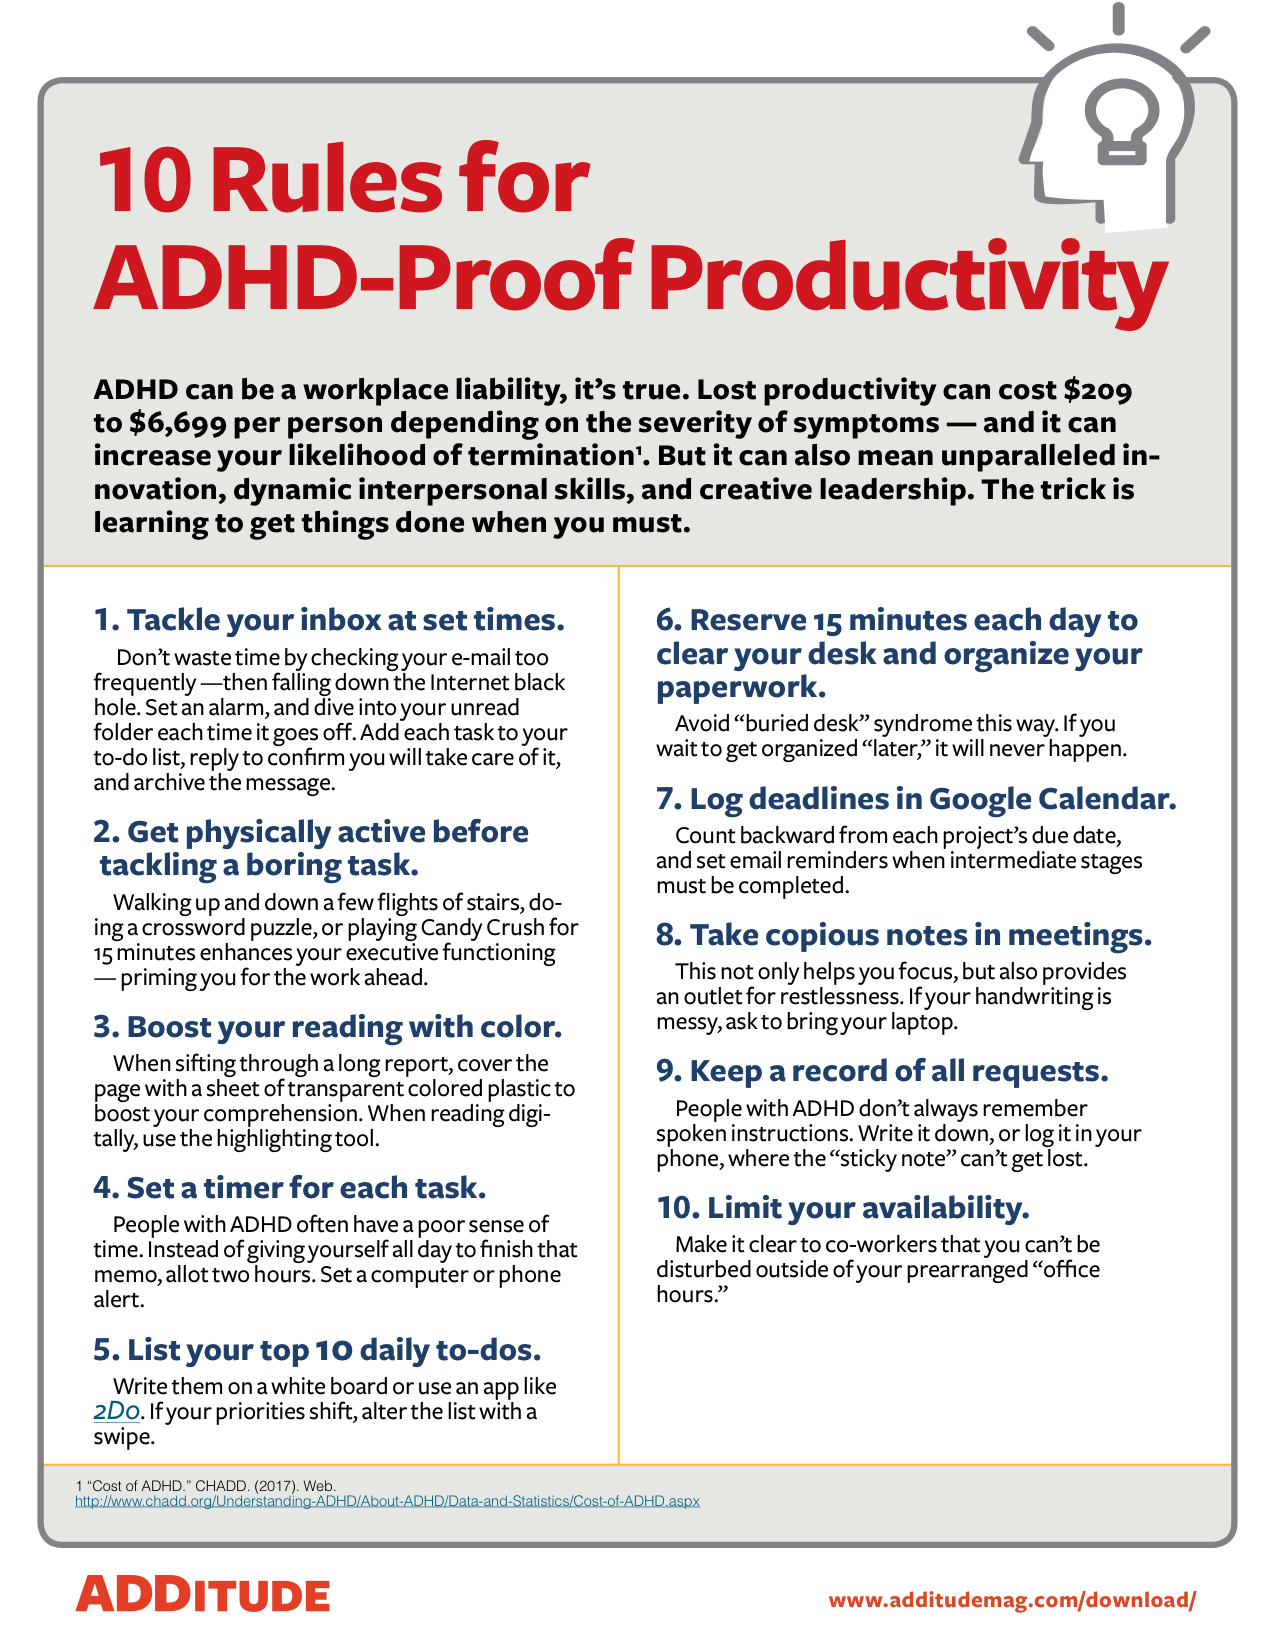 10 Rules for ADHD-Proof Productivity - thumbnail